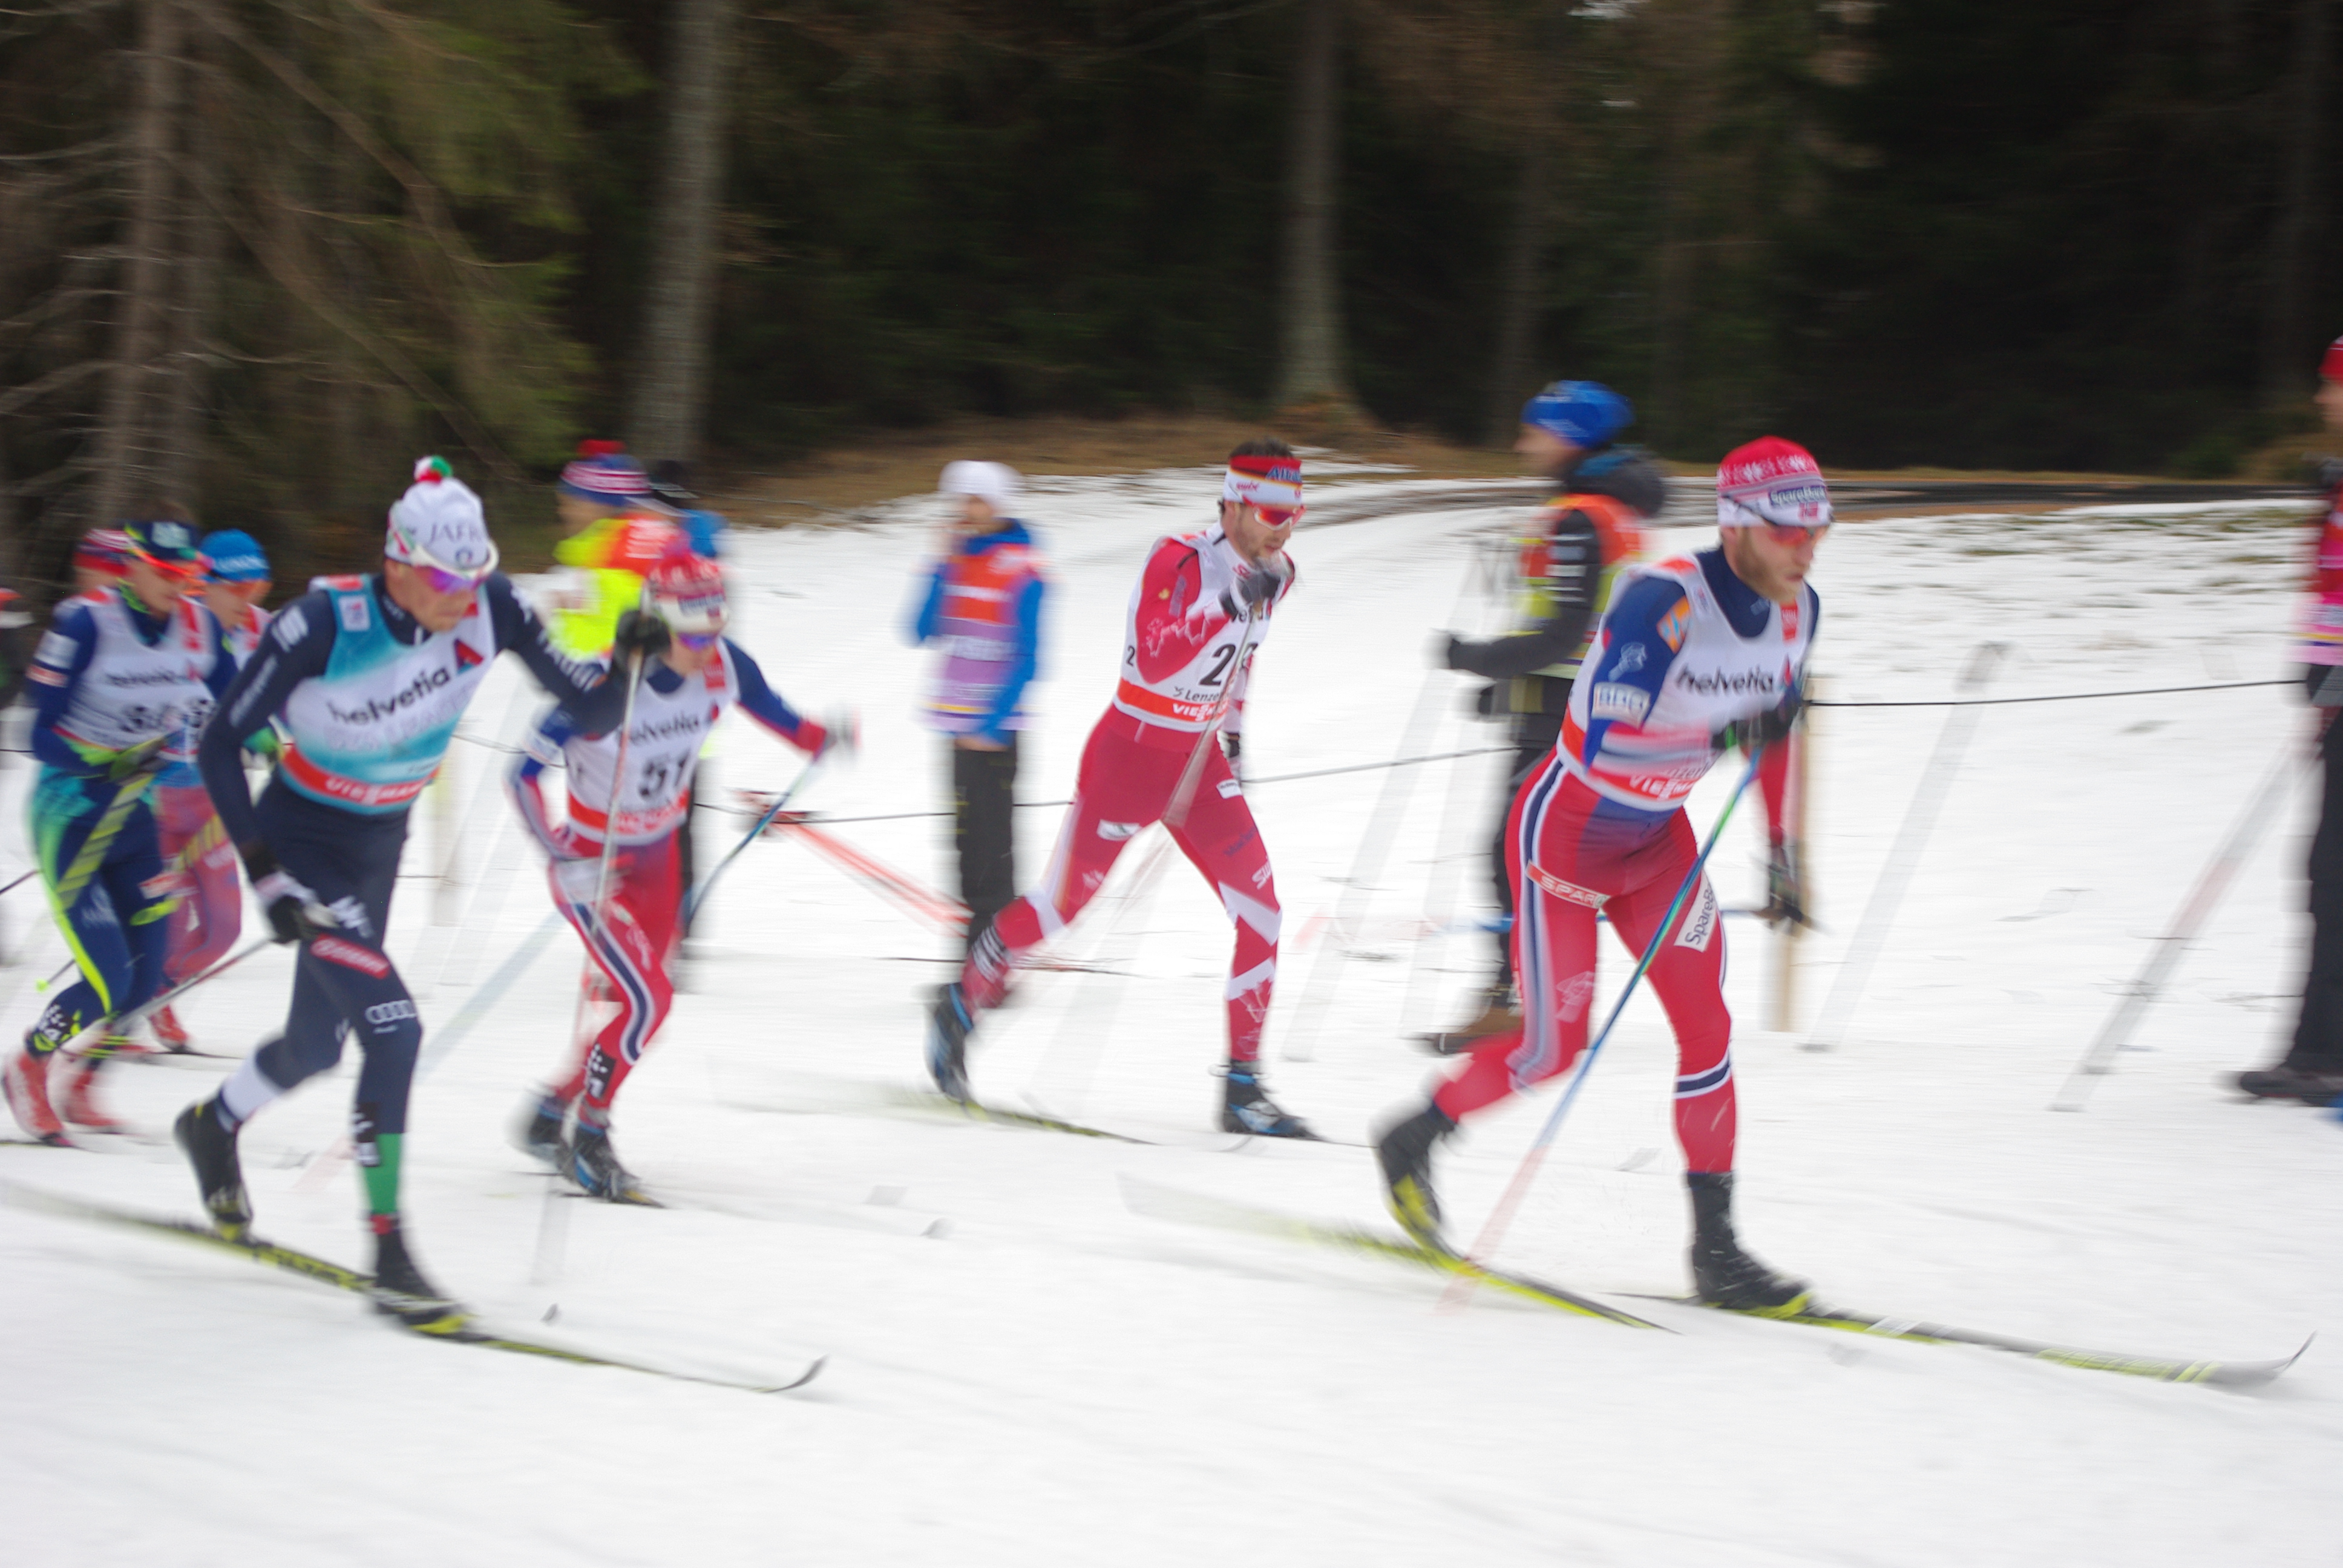 Alex Harvey of Canada (second from right) in the pack with Martin Johnsrud Sundby of Norway in the middle of the 30 k.